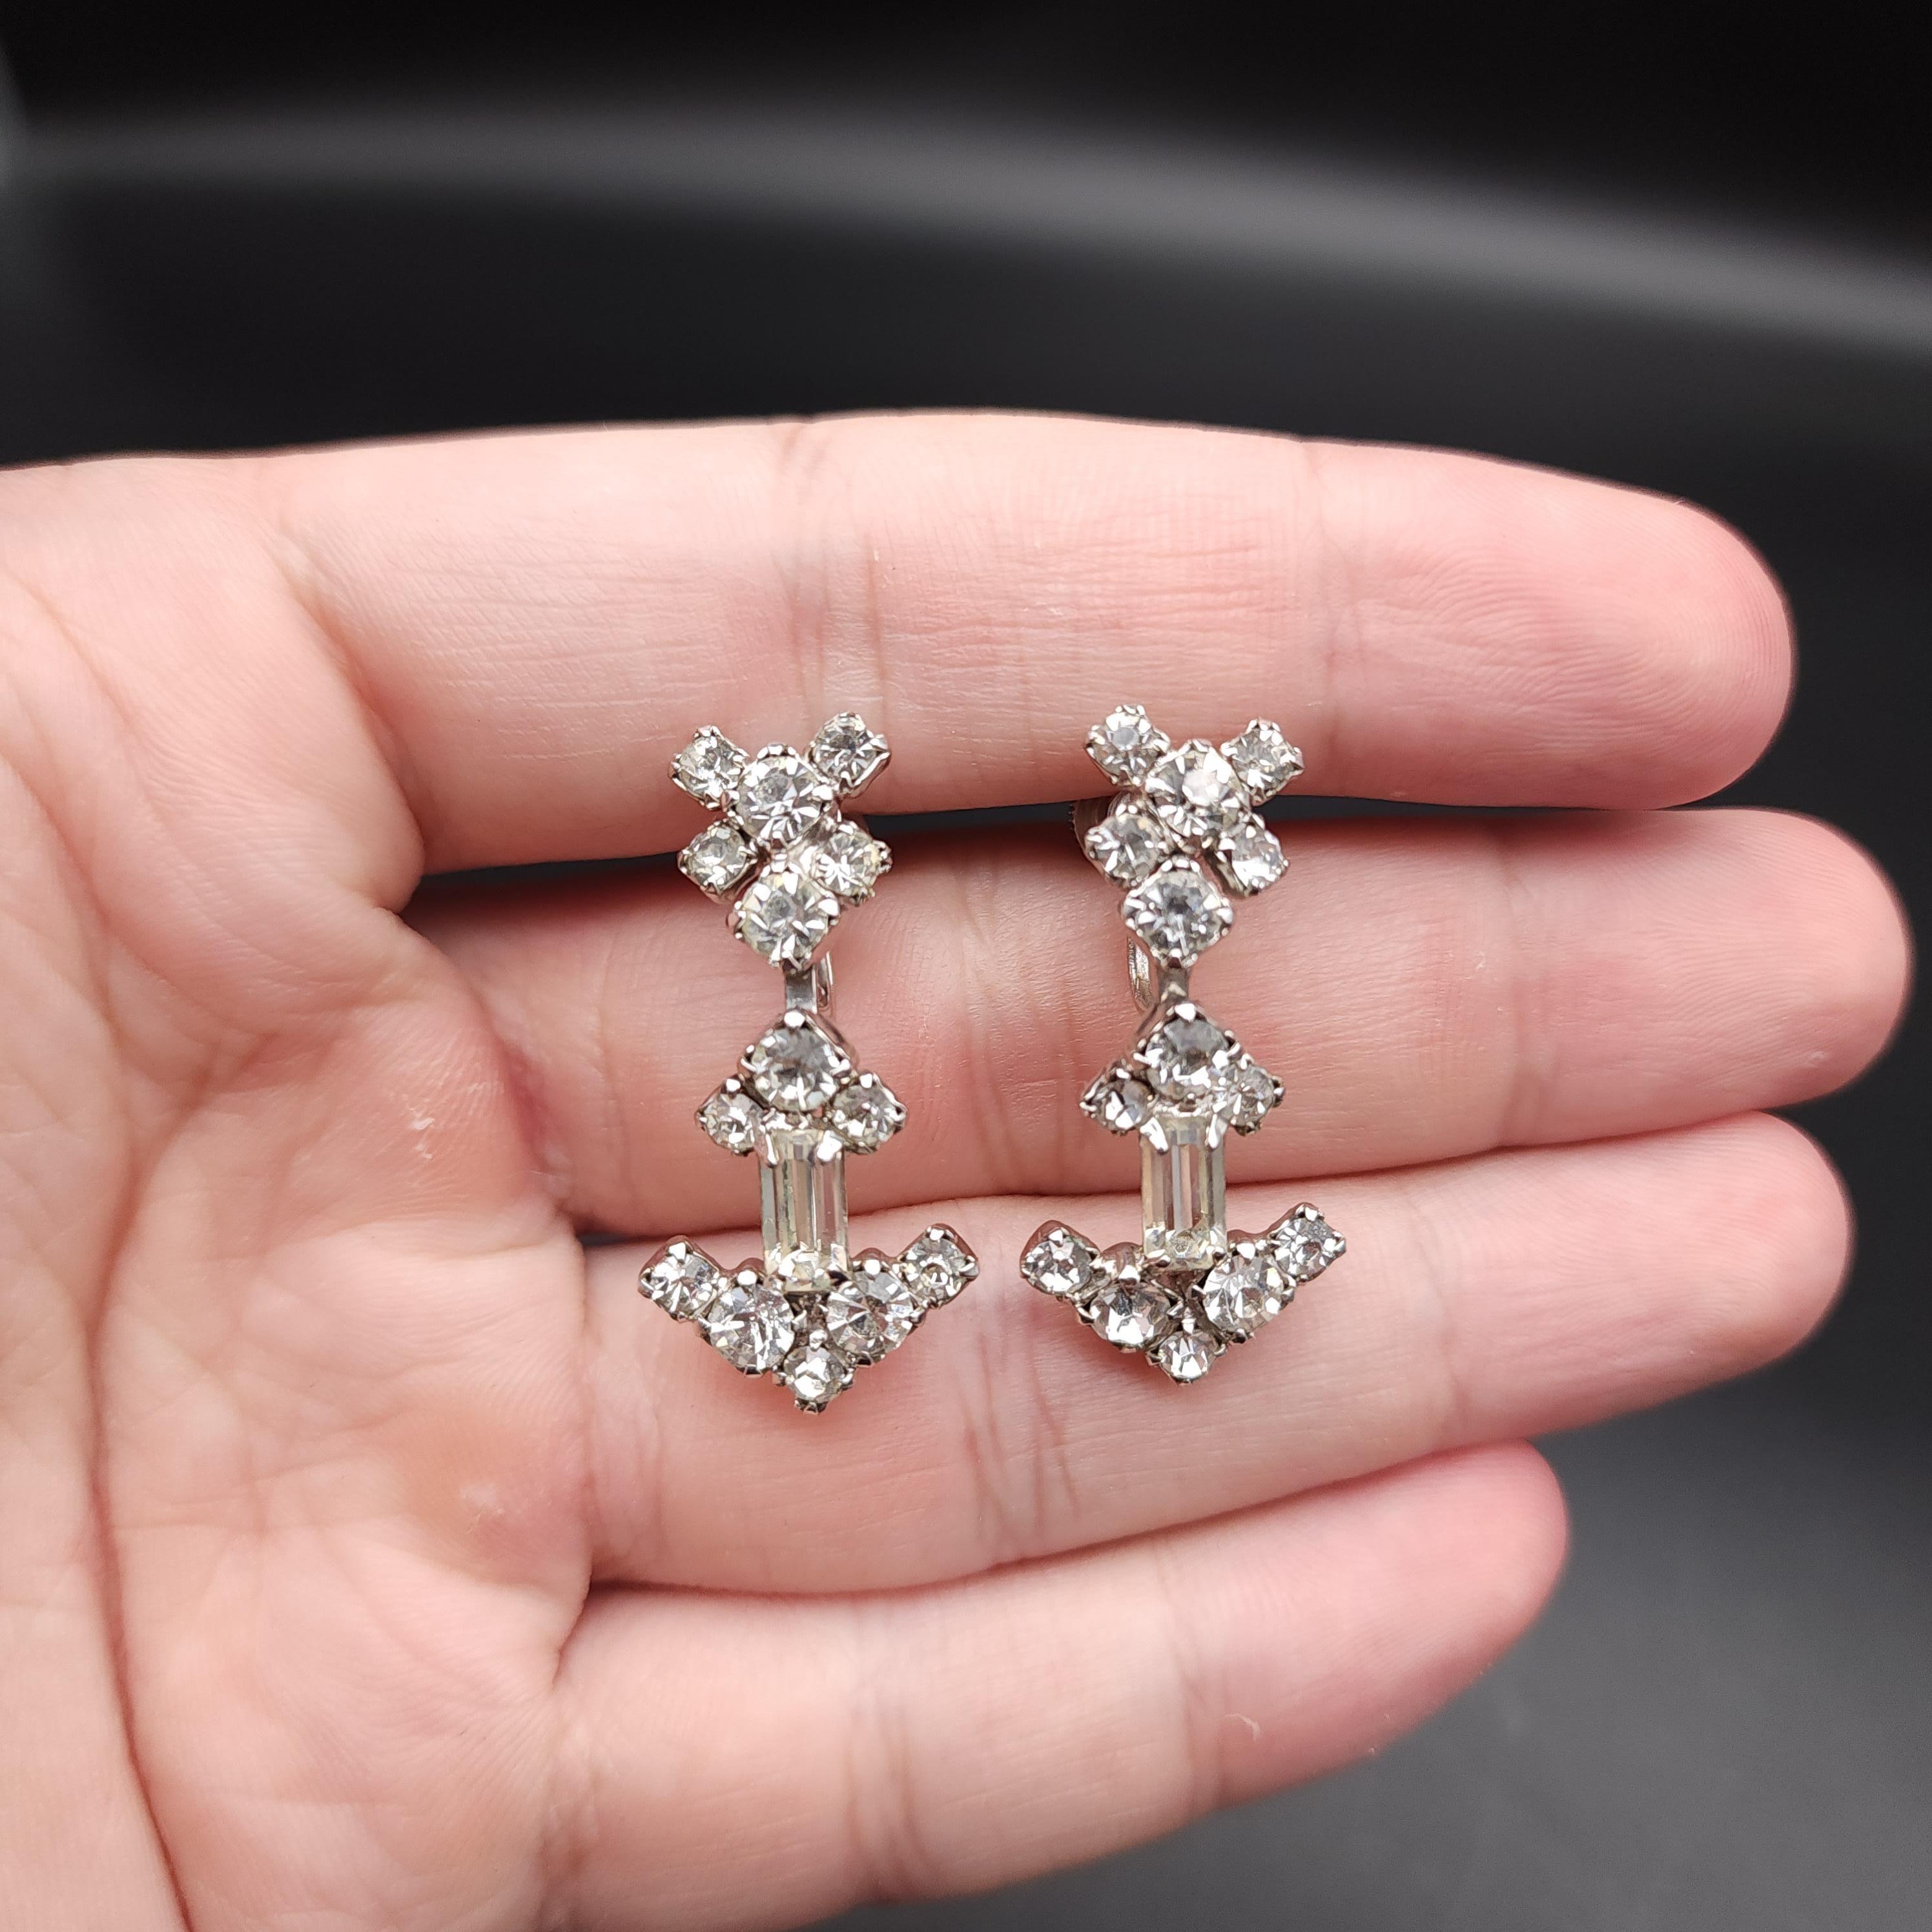 Each earrings: 1 3/8 in. length by 5/8 inch width at widest part

Step back in time with these retro art deco clear crystal earrings, a pair that exudes vintage charm and elegance. These exquisite earrings feature prong-set round and baguette